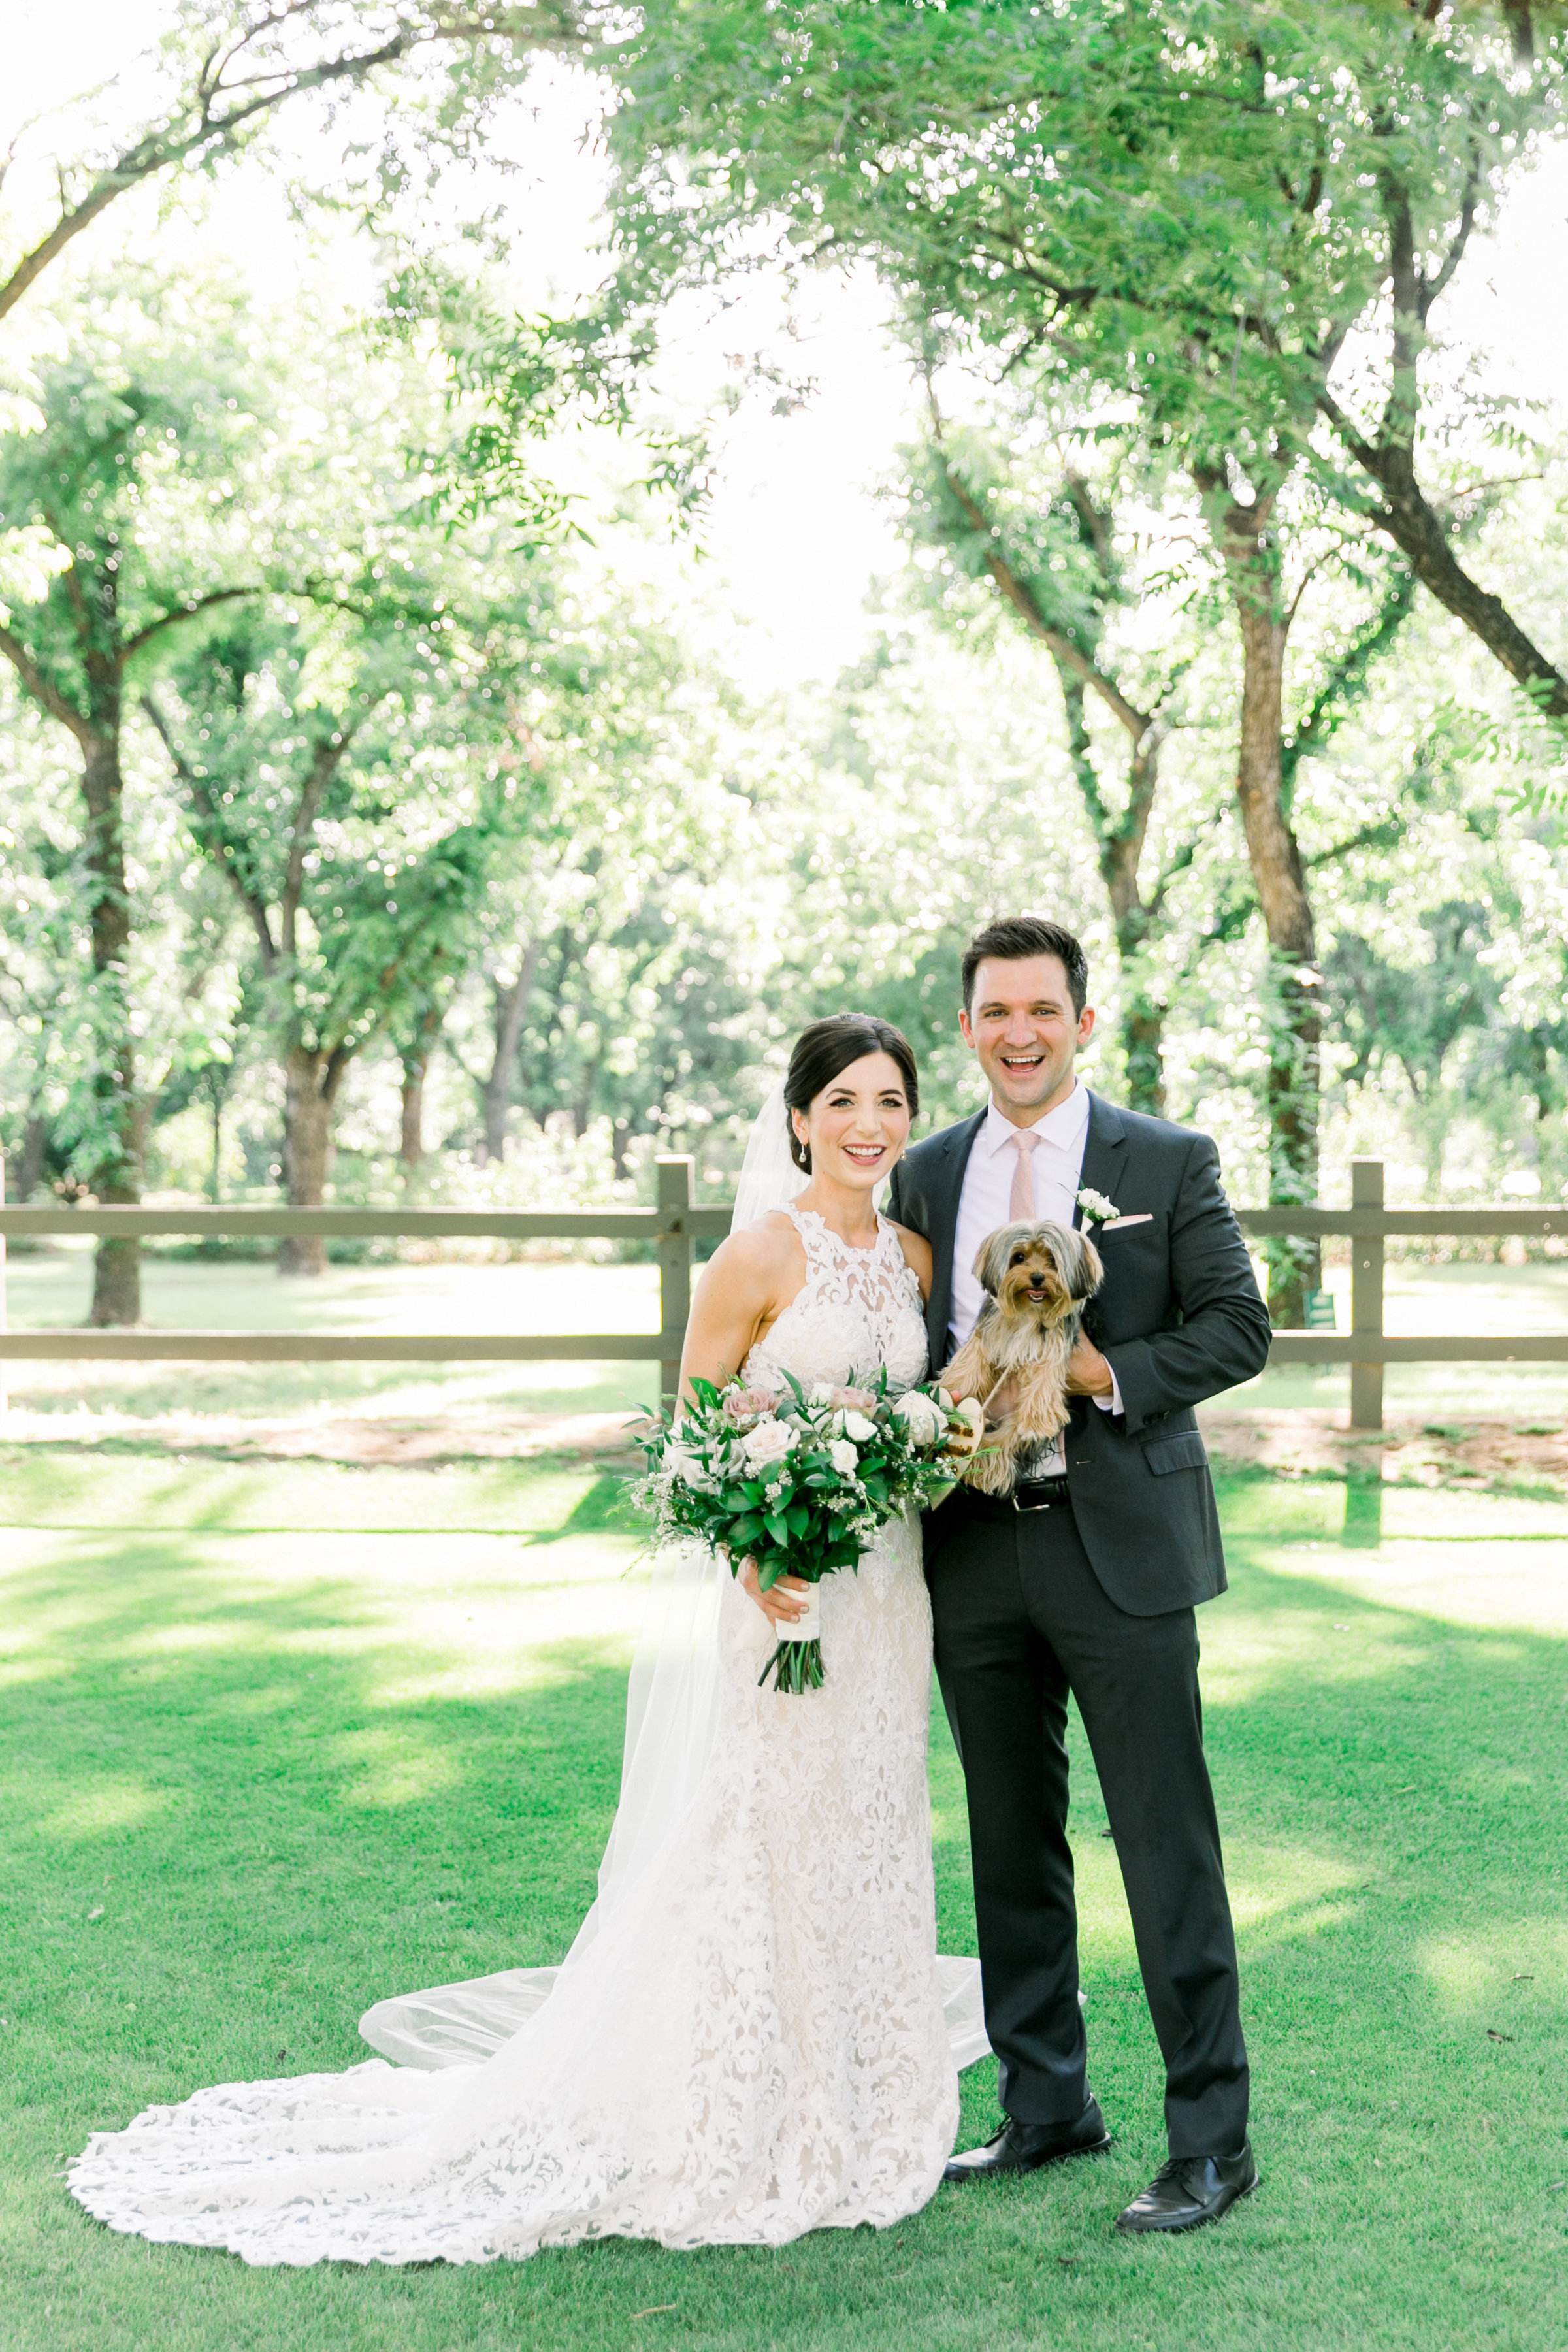 Karlie Colleen Photography - Arizona Wedding - Venue At The Grove - Maggie & Grant-382